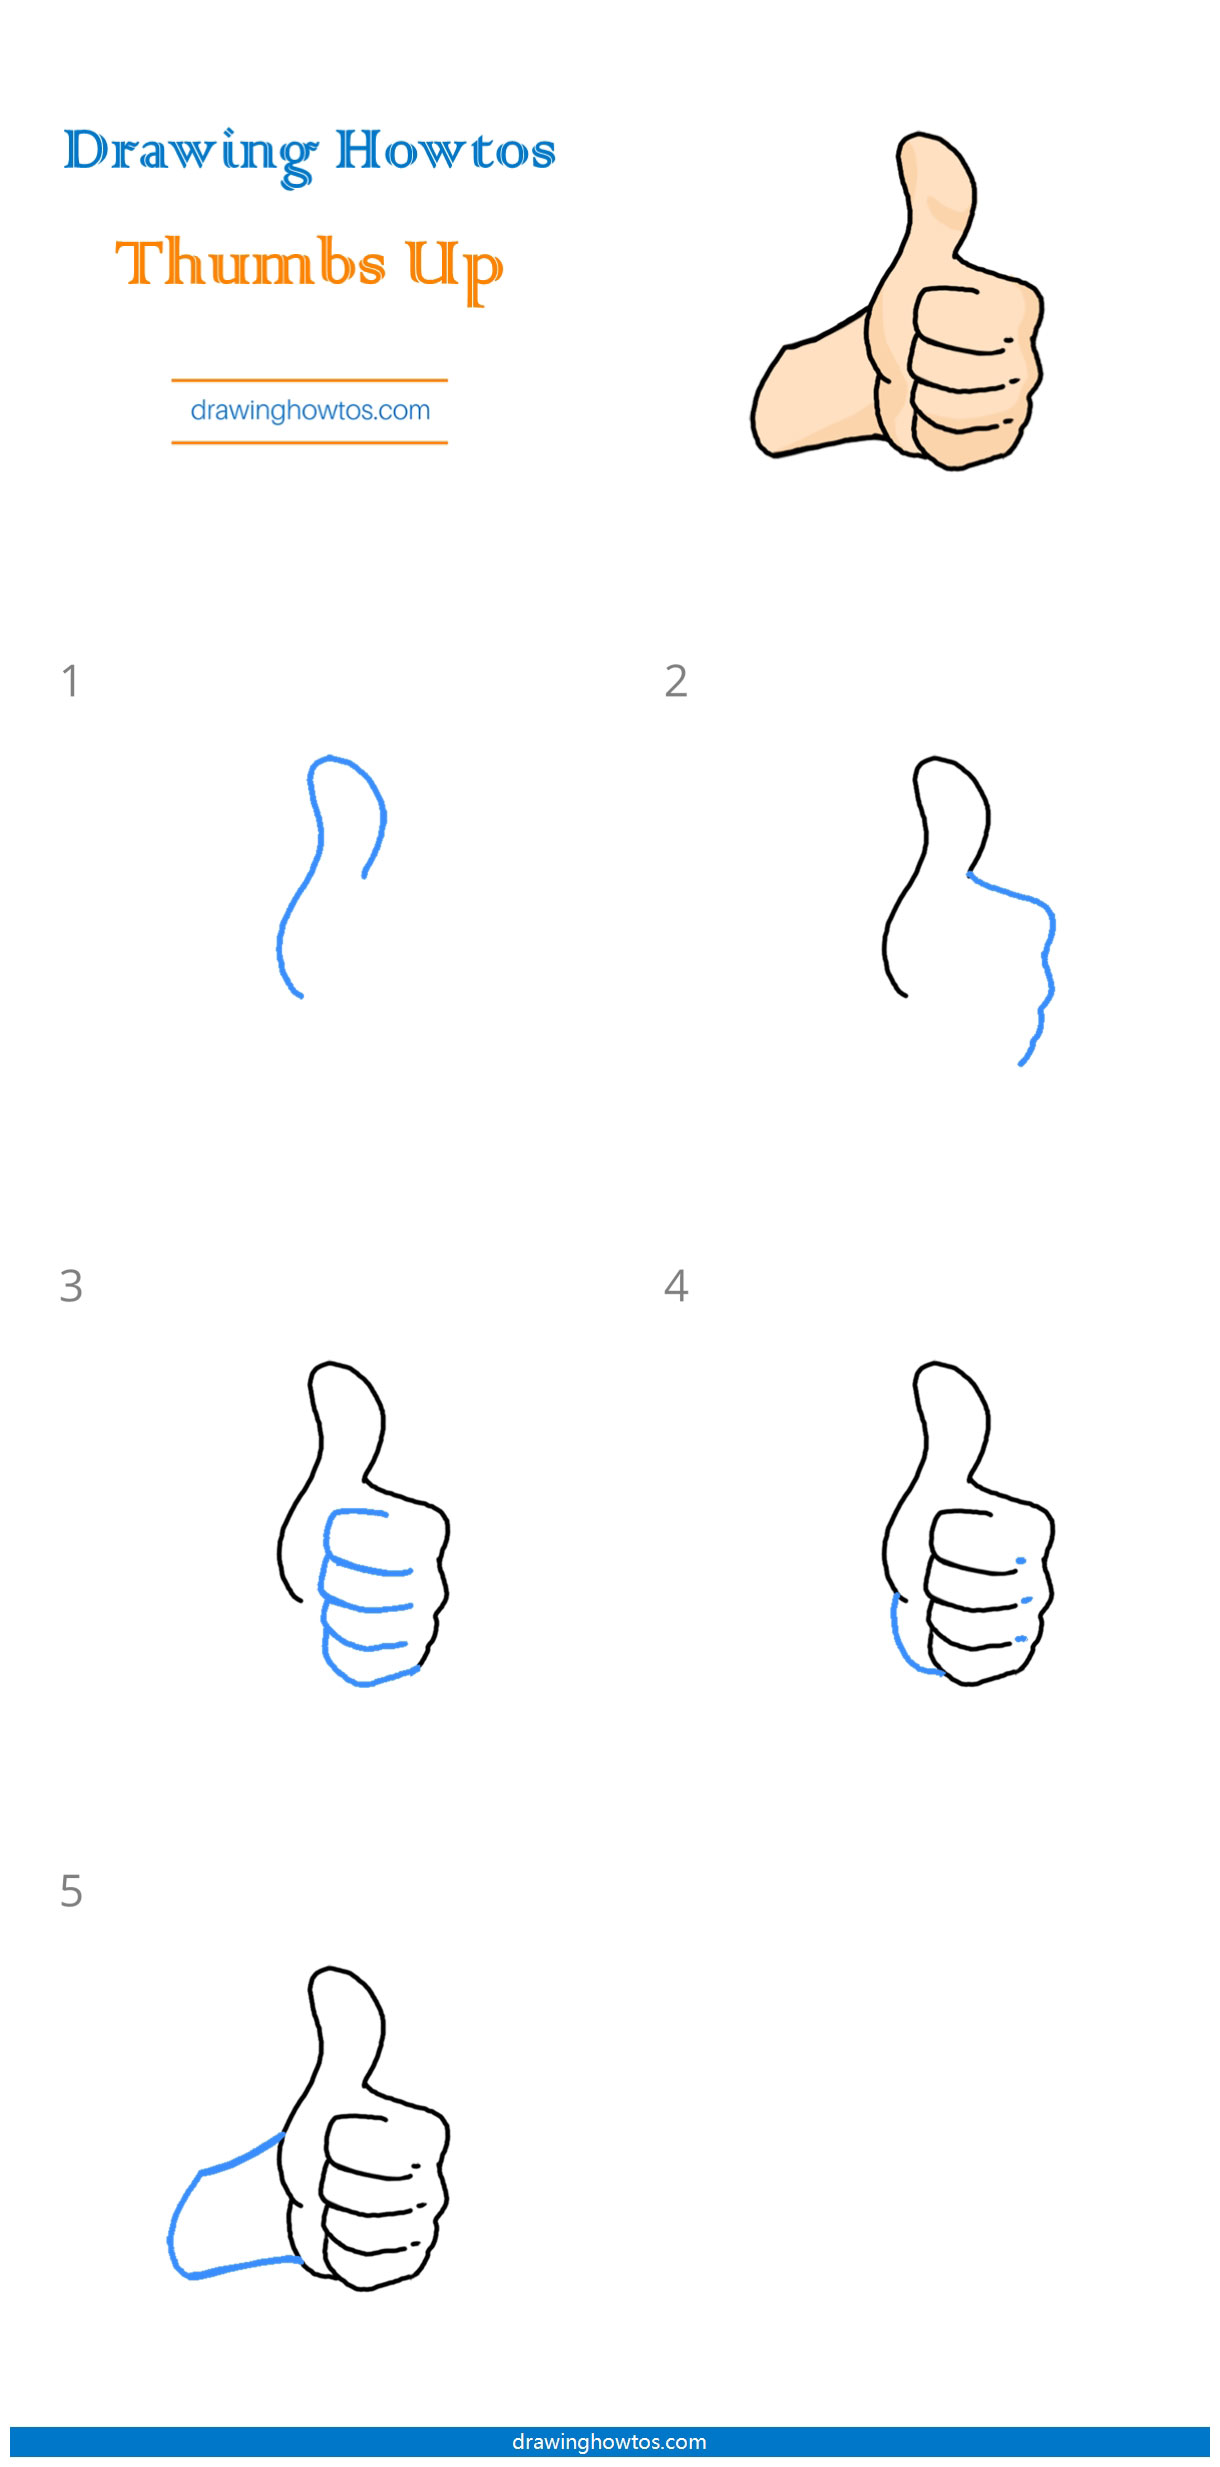 How to Draw a Thumbs Up Step by Step